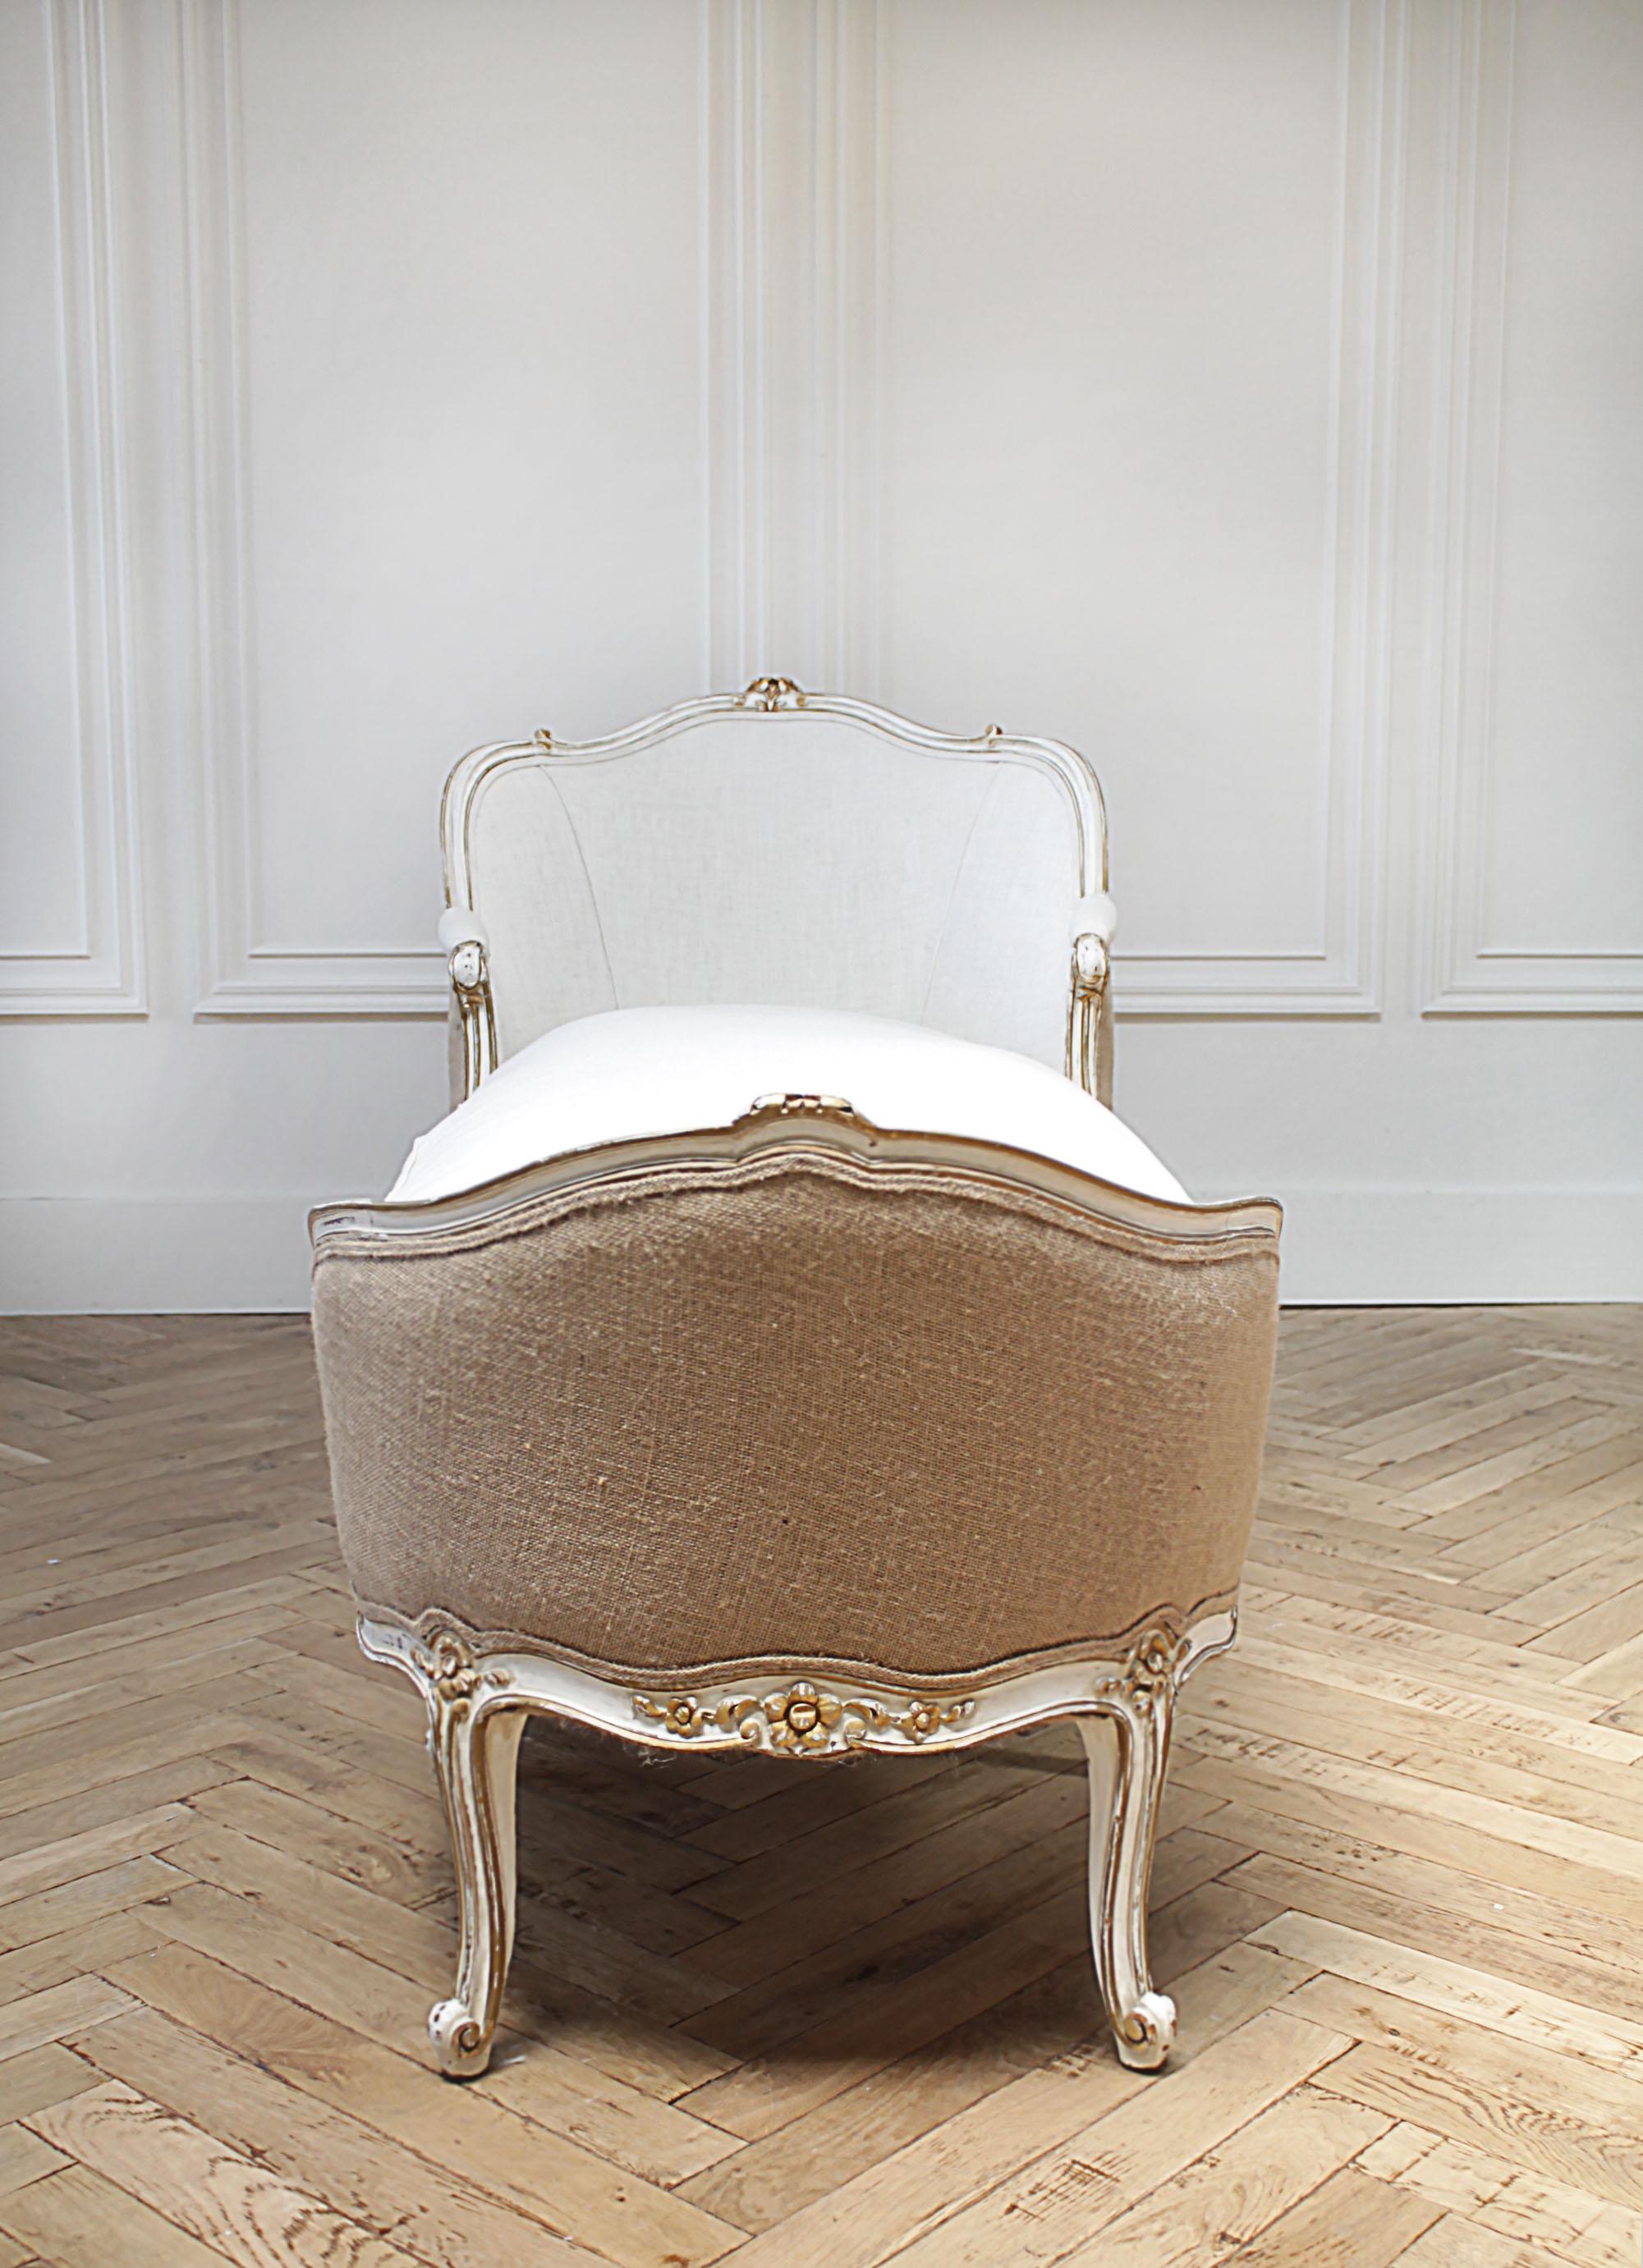 Vintage Louis XV style painted and upholstered linen chaise lounge
Painted in an antique white finish with gilt carved edges, subtle distressed patina to the edges. The paint is original to the piece, and has a wonderful aged look.
We